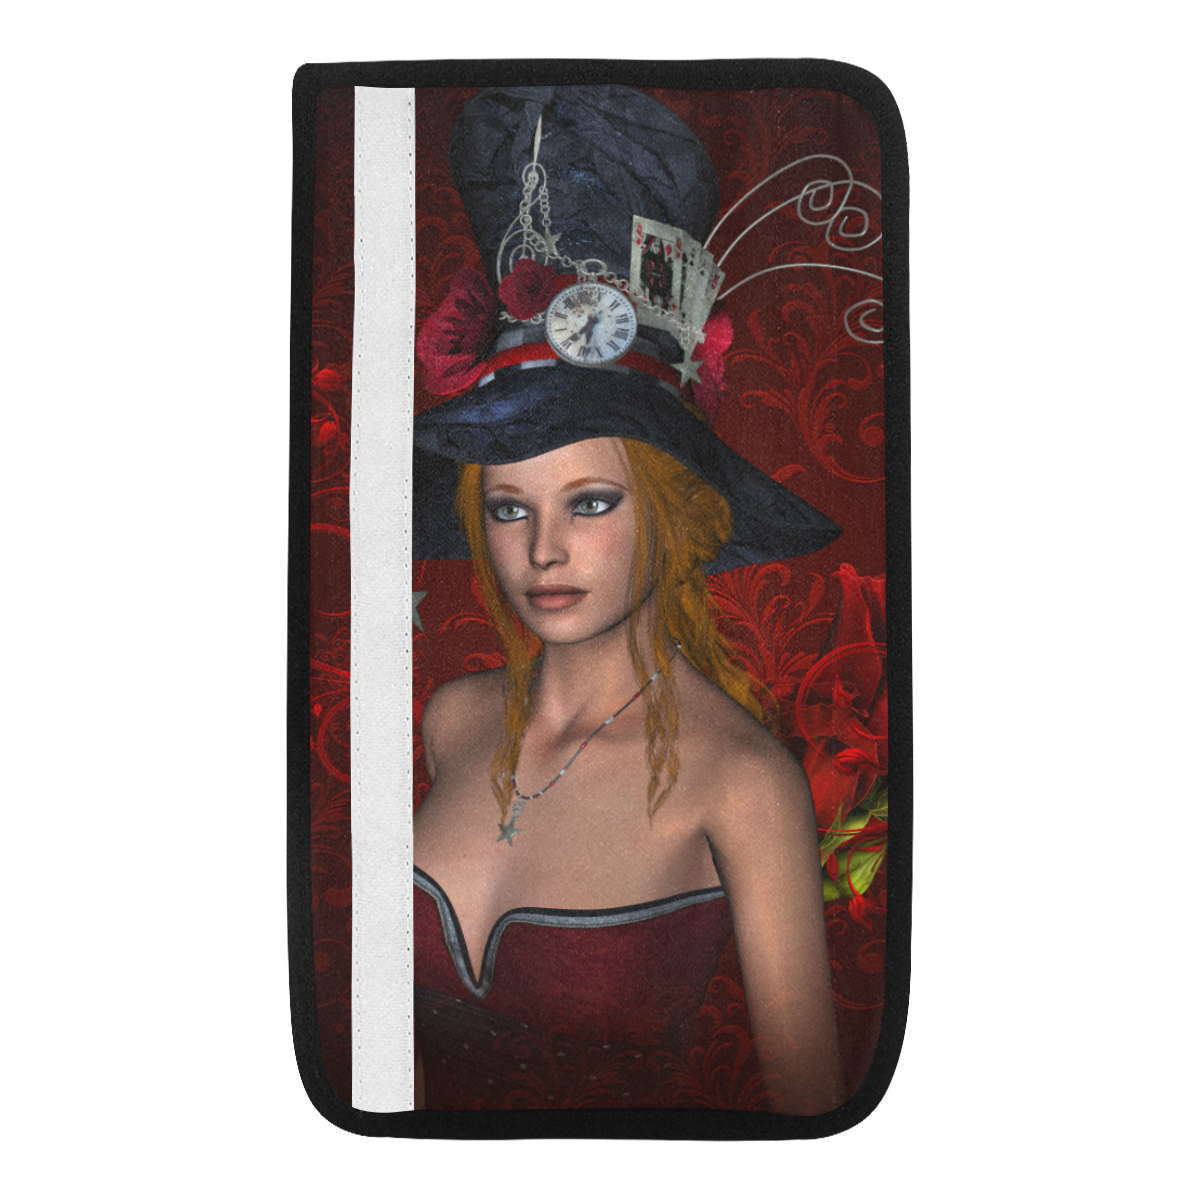 Beautiful steampunk lady, awesome hat Car Seat Belt Cover 7''x12.6''